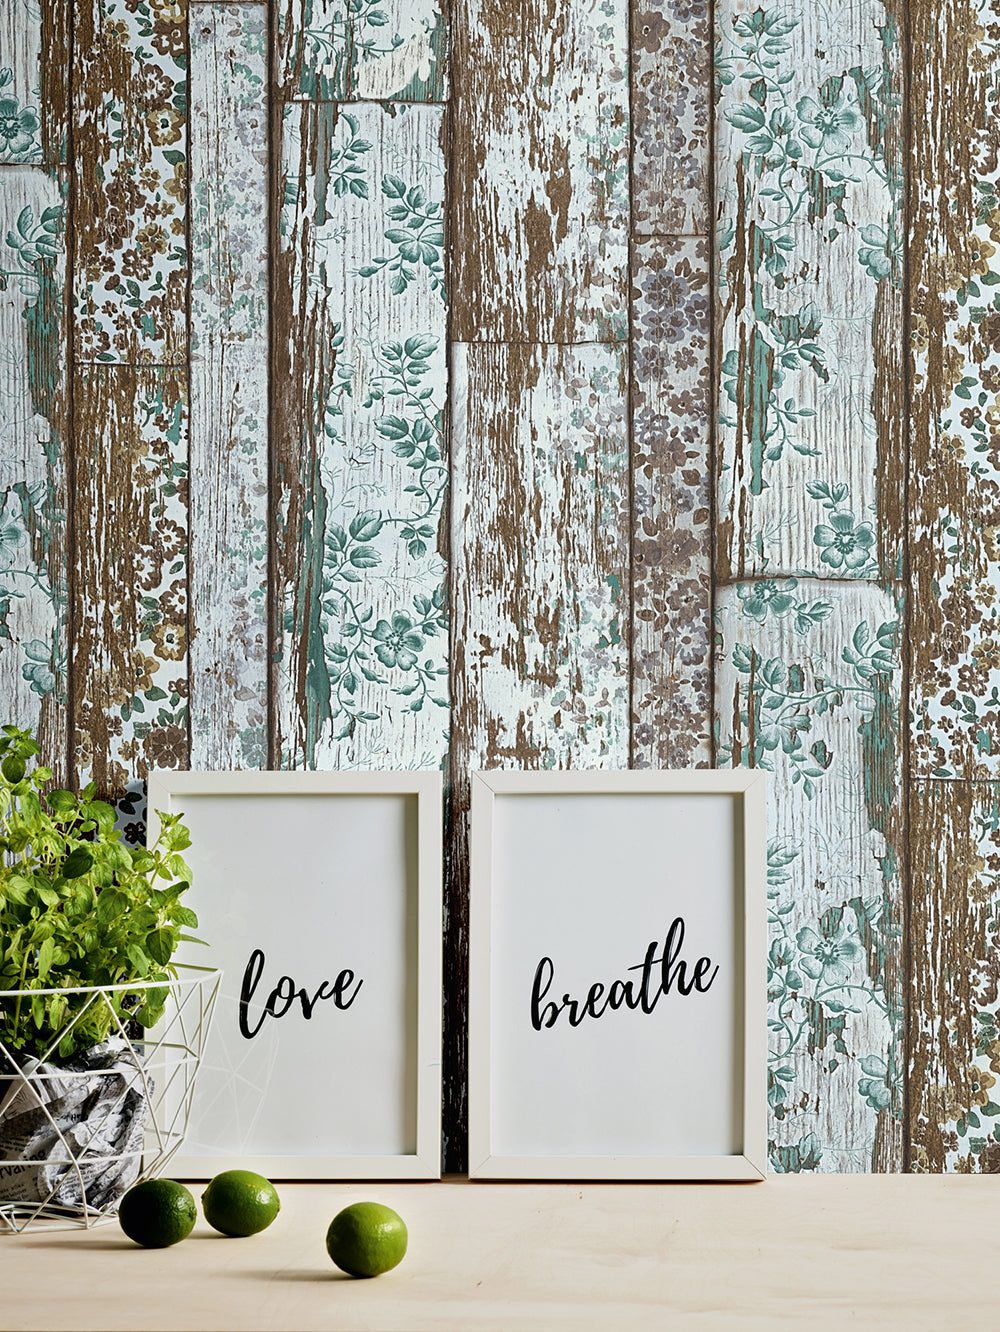 Bude 2.0 - Floral Rustic Timber industrial wallpaper AS Creation    